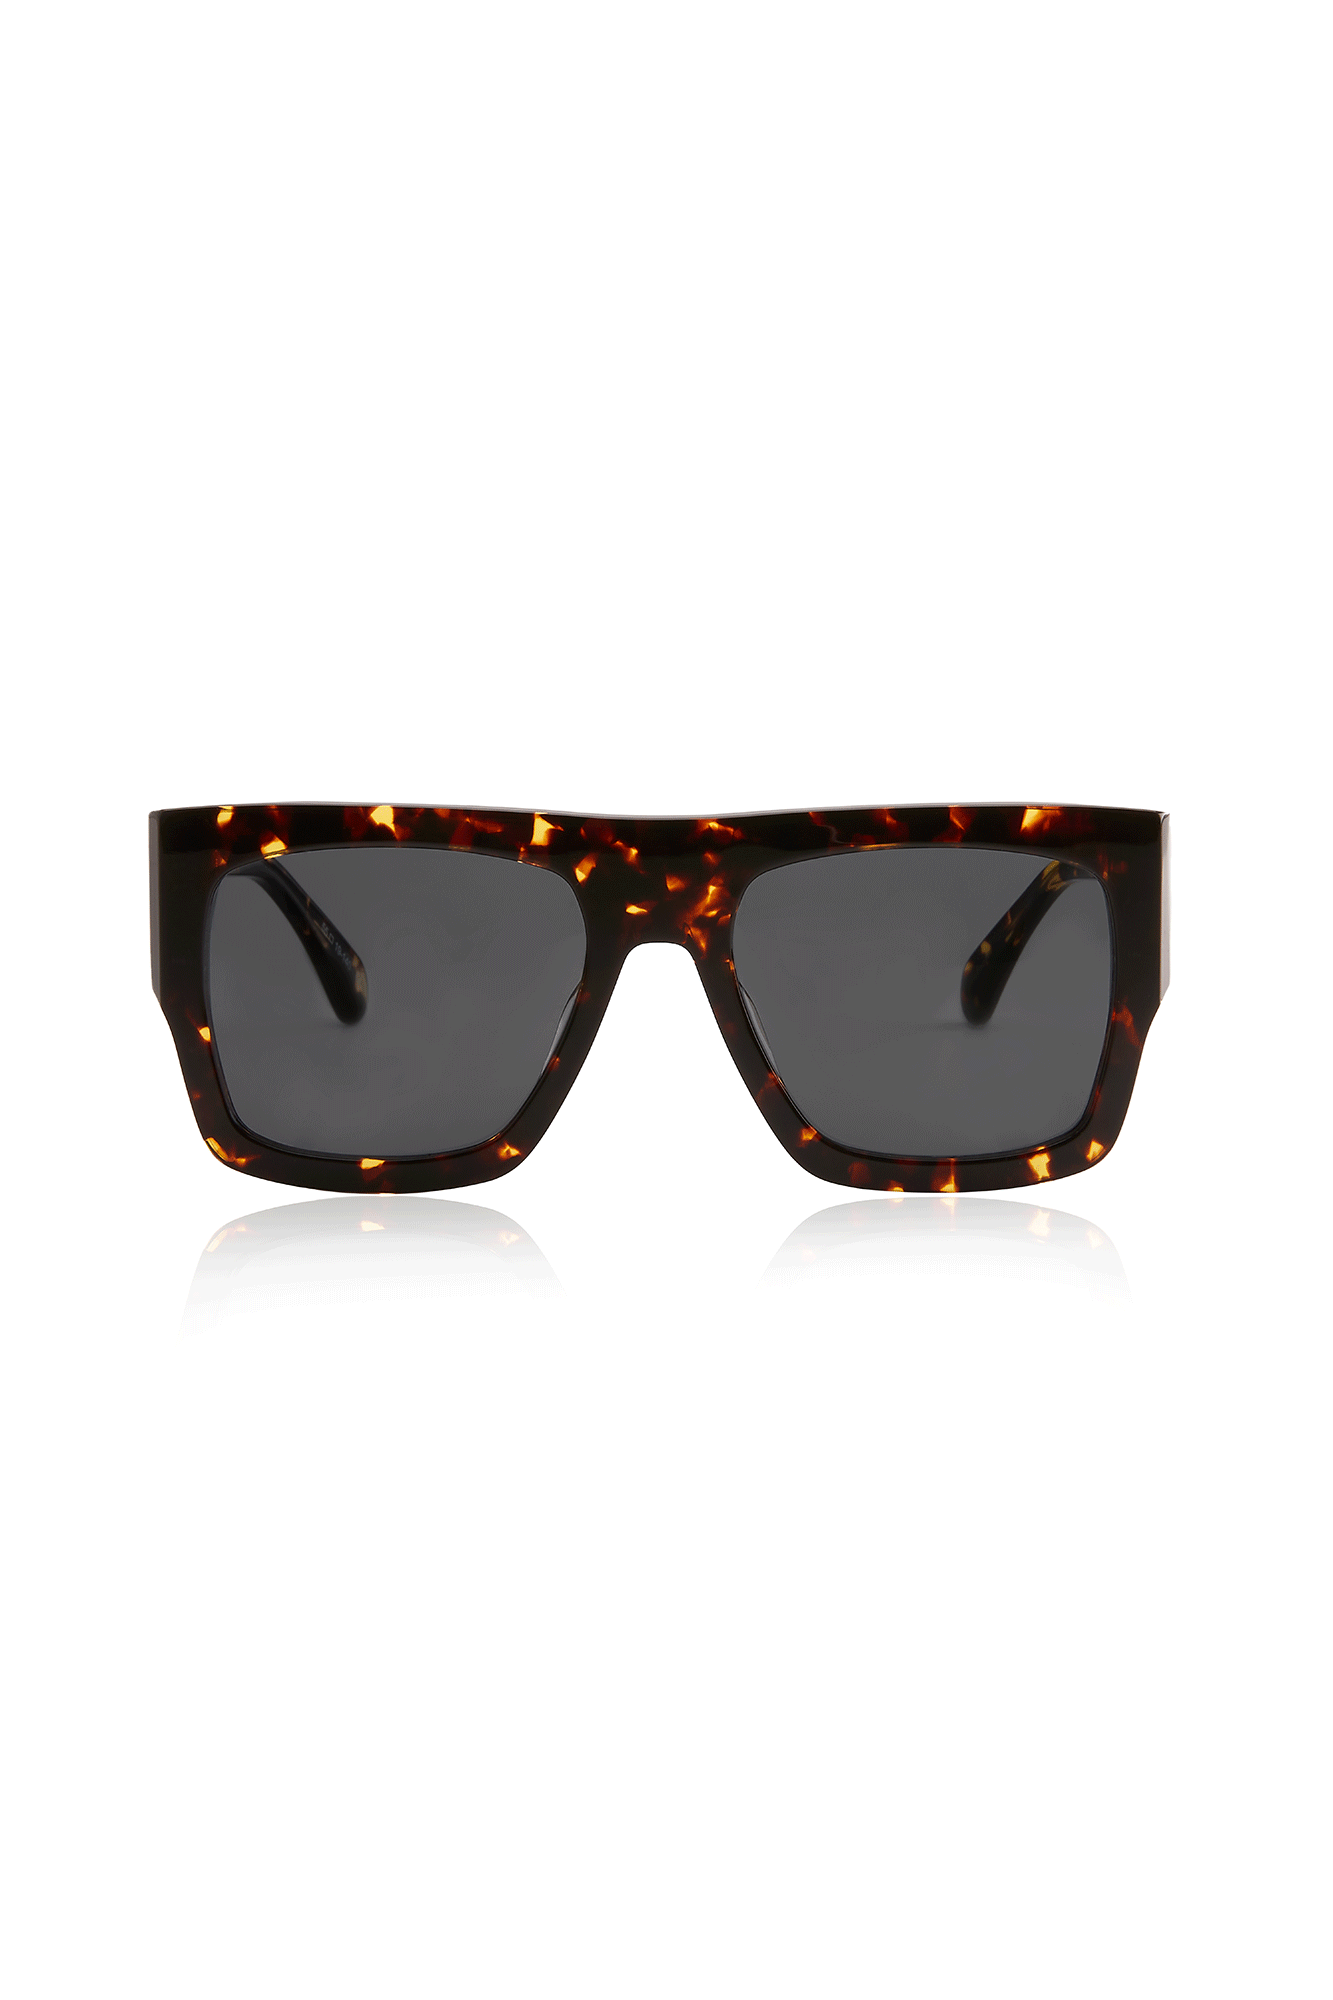 Caino Dark Tort Sunglasses from Oscar x Frank are the perfect combination of style and function. Crafted from a durable acetate material, they are designed to last, with 100% UV protection and anti-glare lenses. Enjoy the look and feel of quality eyewear without sacrificing performance.